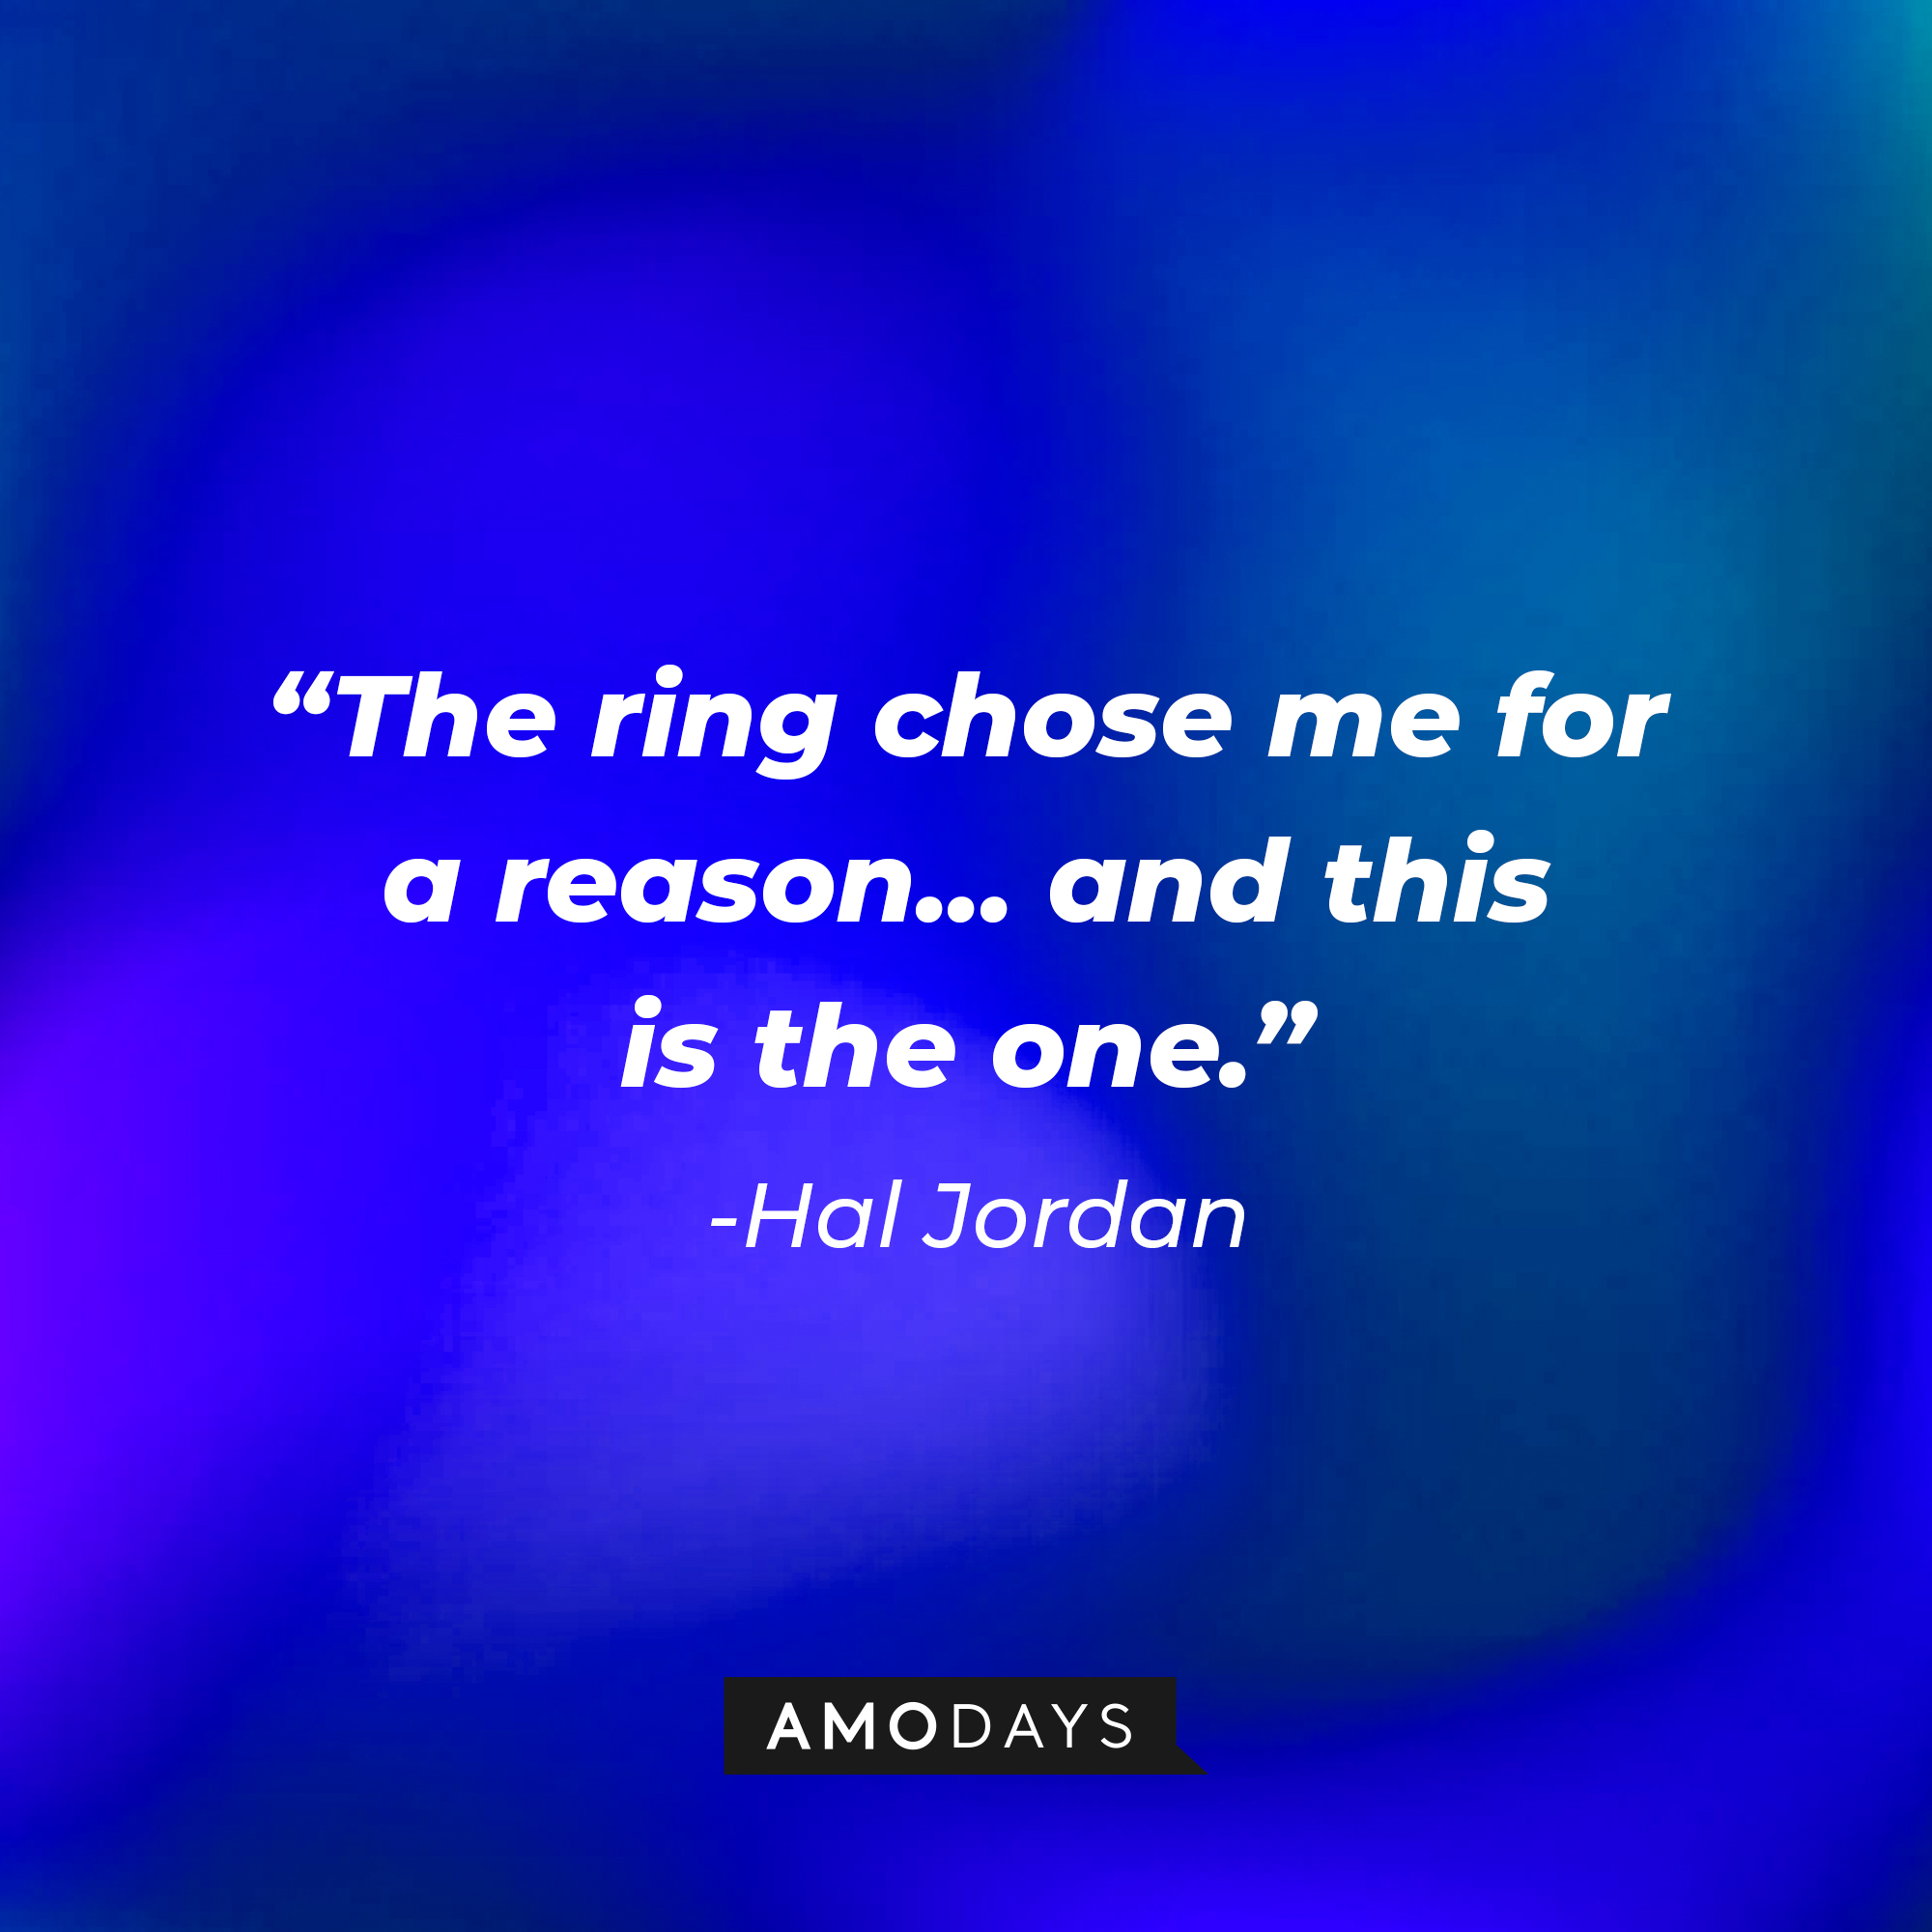 Hal Jordan's quote: "The ring chose me for a reason... and this is the one." | Source: AmoDays